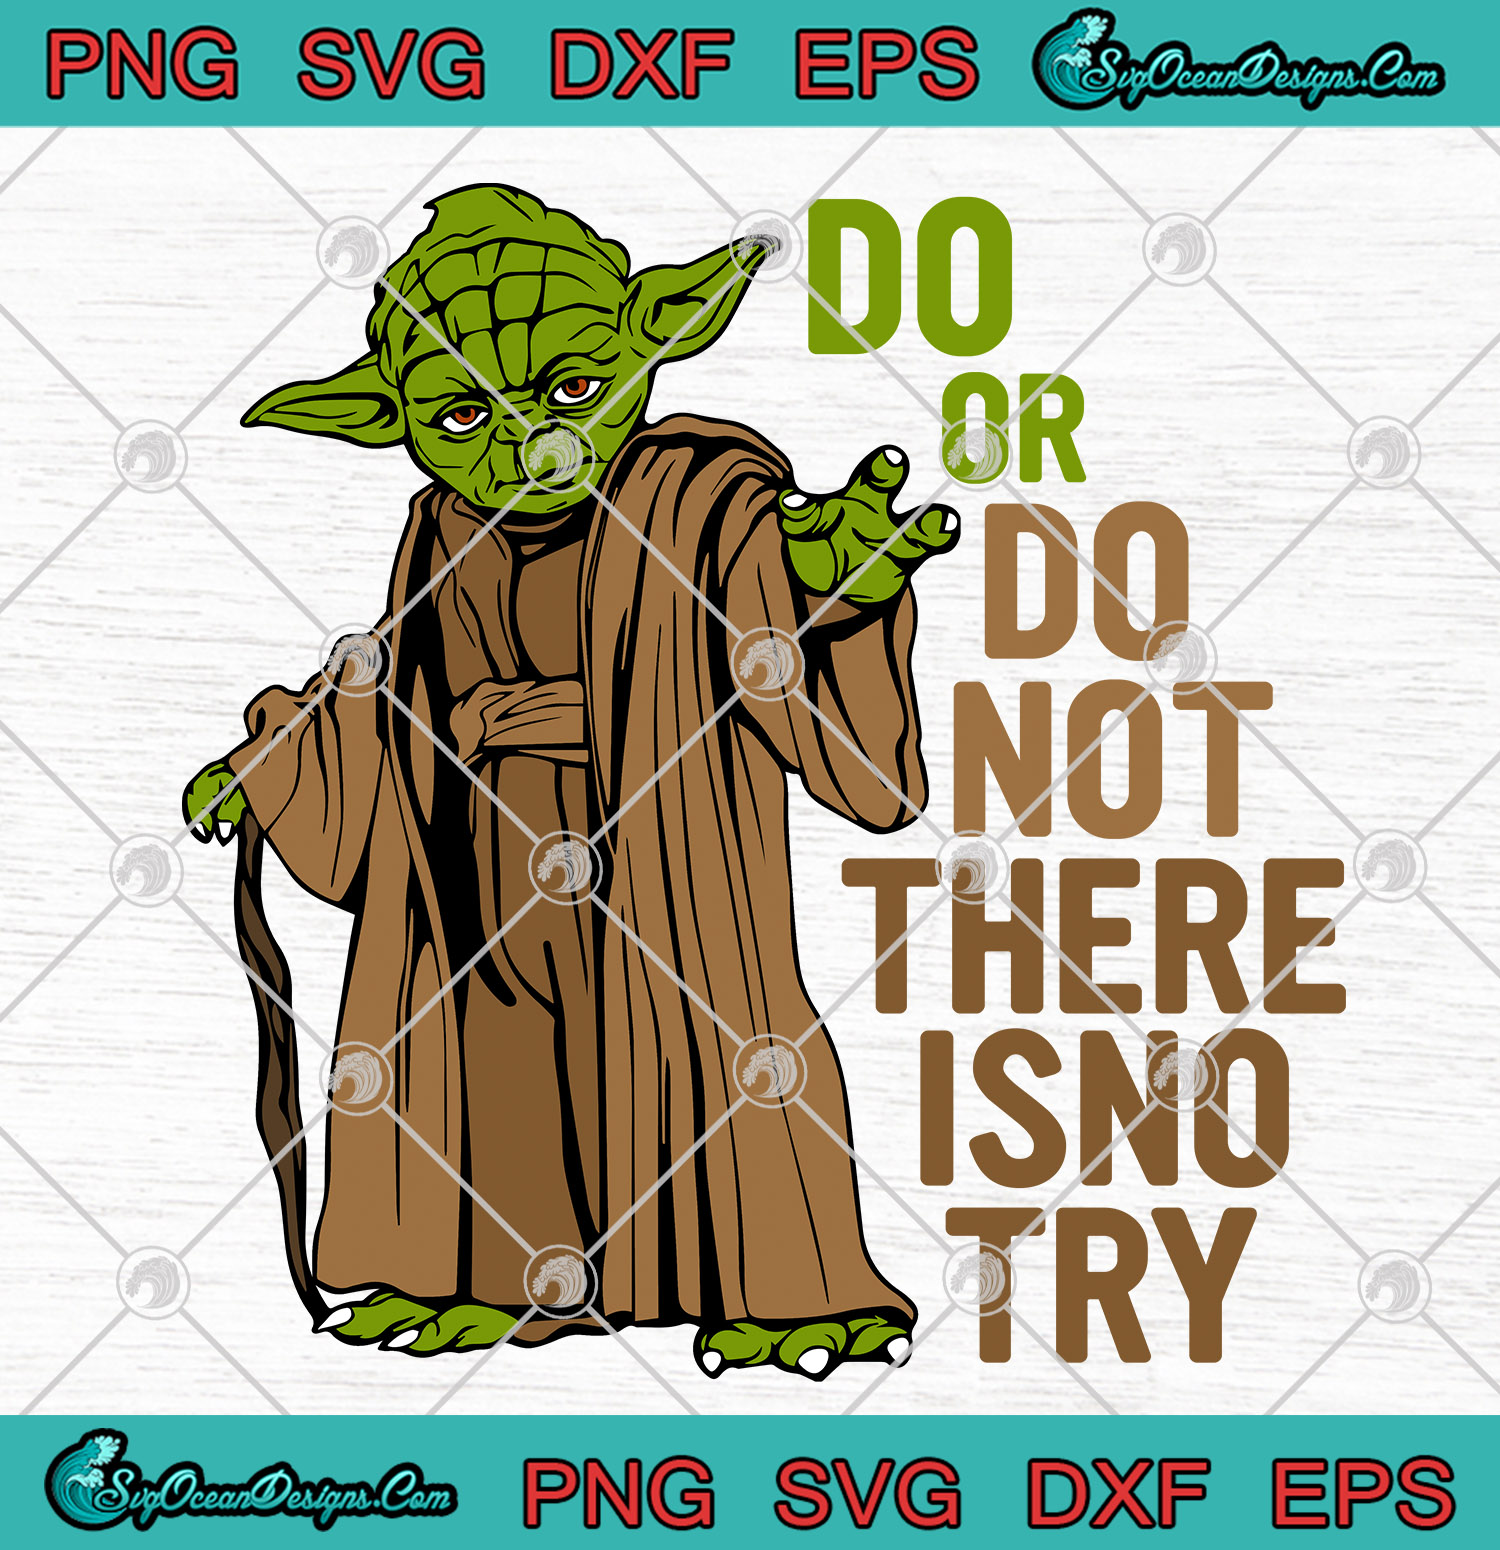 Download Star Wars Yoda Do Or Do Not There Isno Try Svg Png Eps Dxf Star Wats Yoda Svg Png Clipart Art Designs For Shirts Designs Digital Download